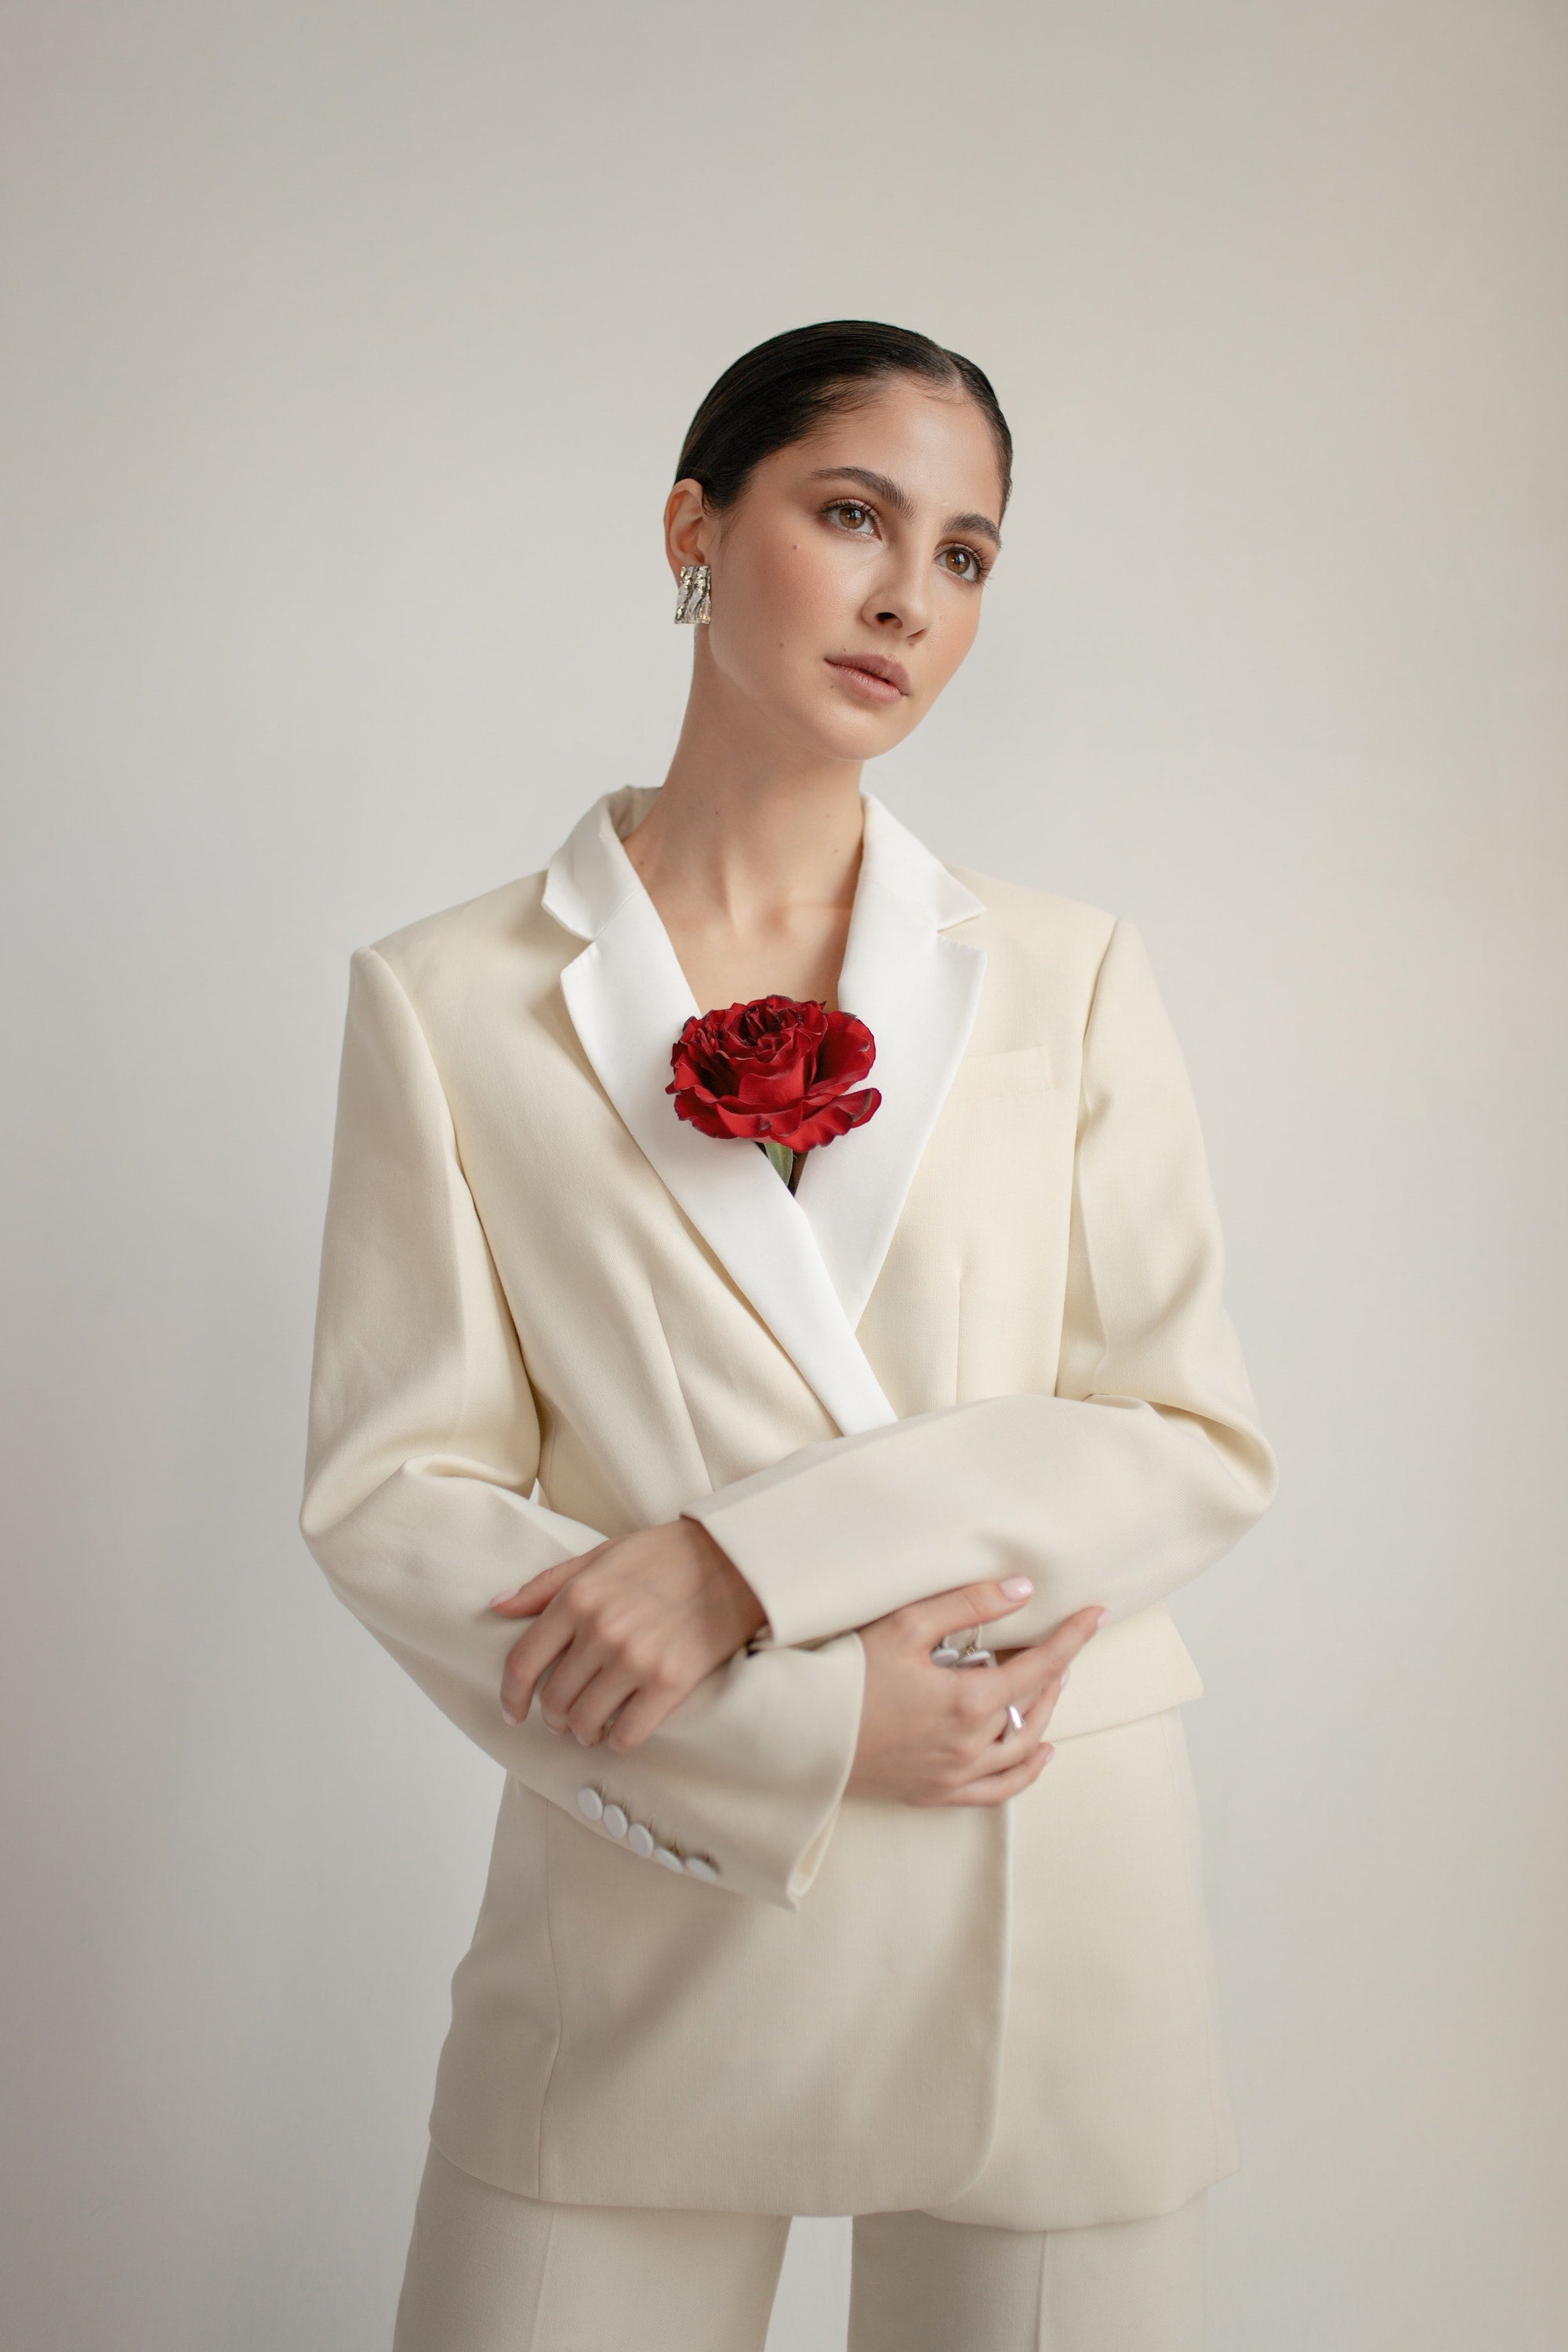 Why-you-Should-Consider-a-Suit-for-your-Destination-Wedding Sinclair London